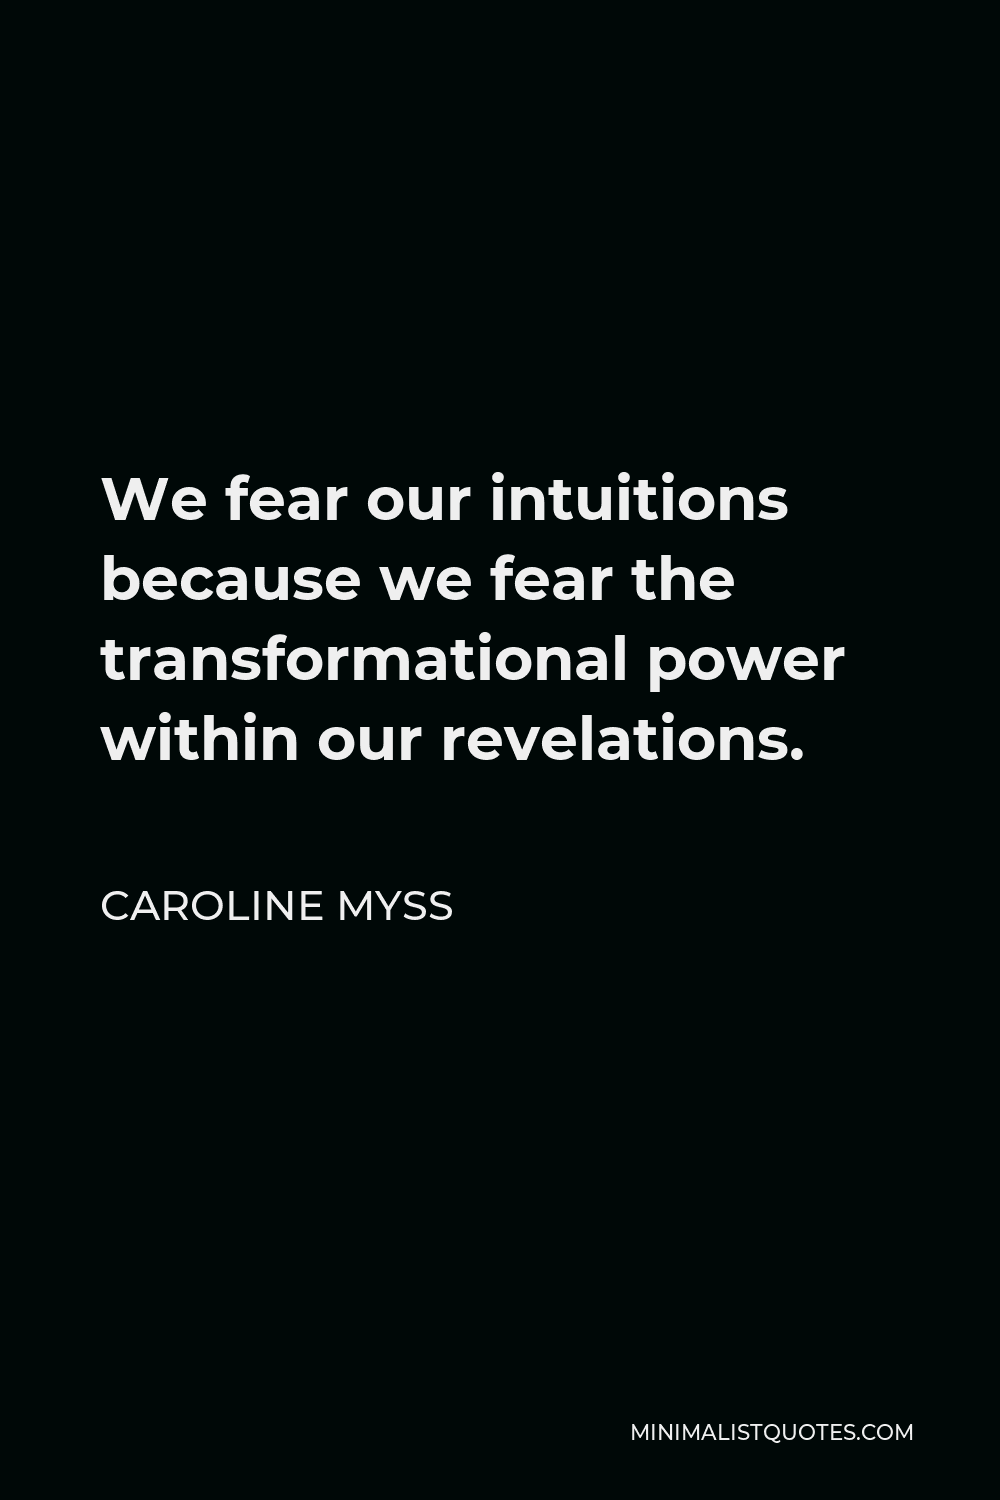 Caroline Myss Quote - We fear our intuitions because we fear the transformational power within our revelations.